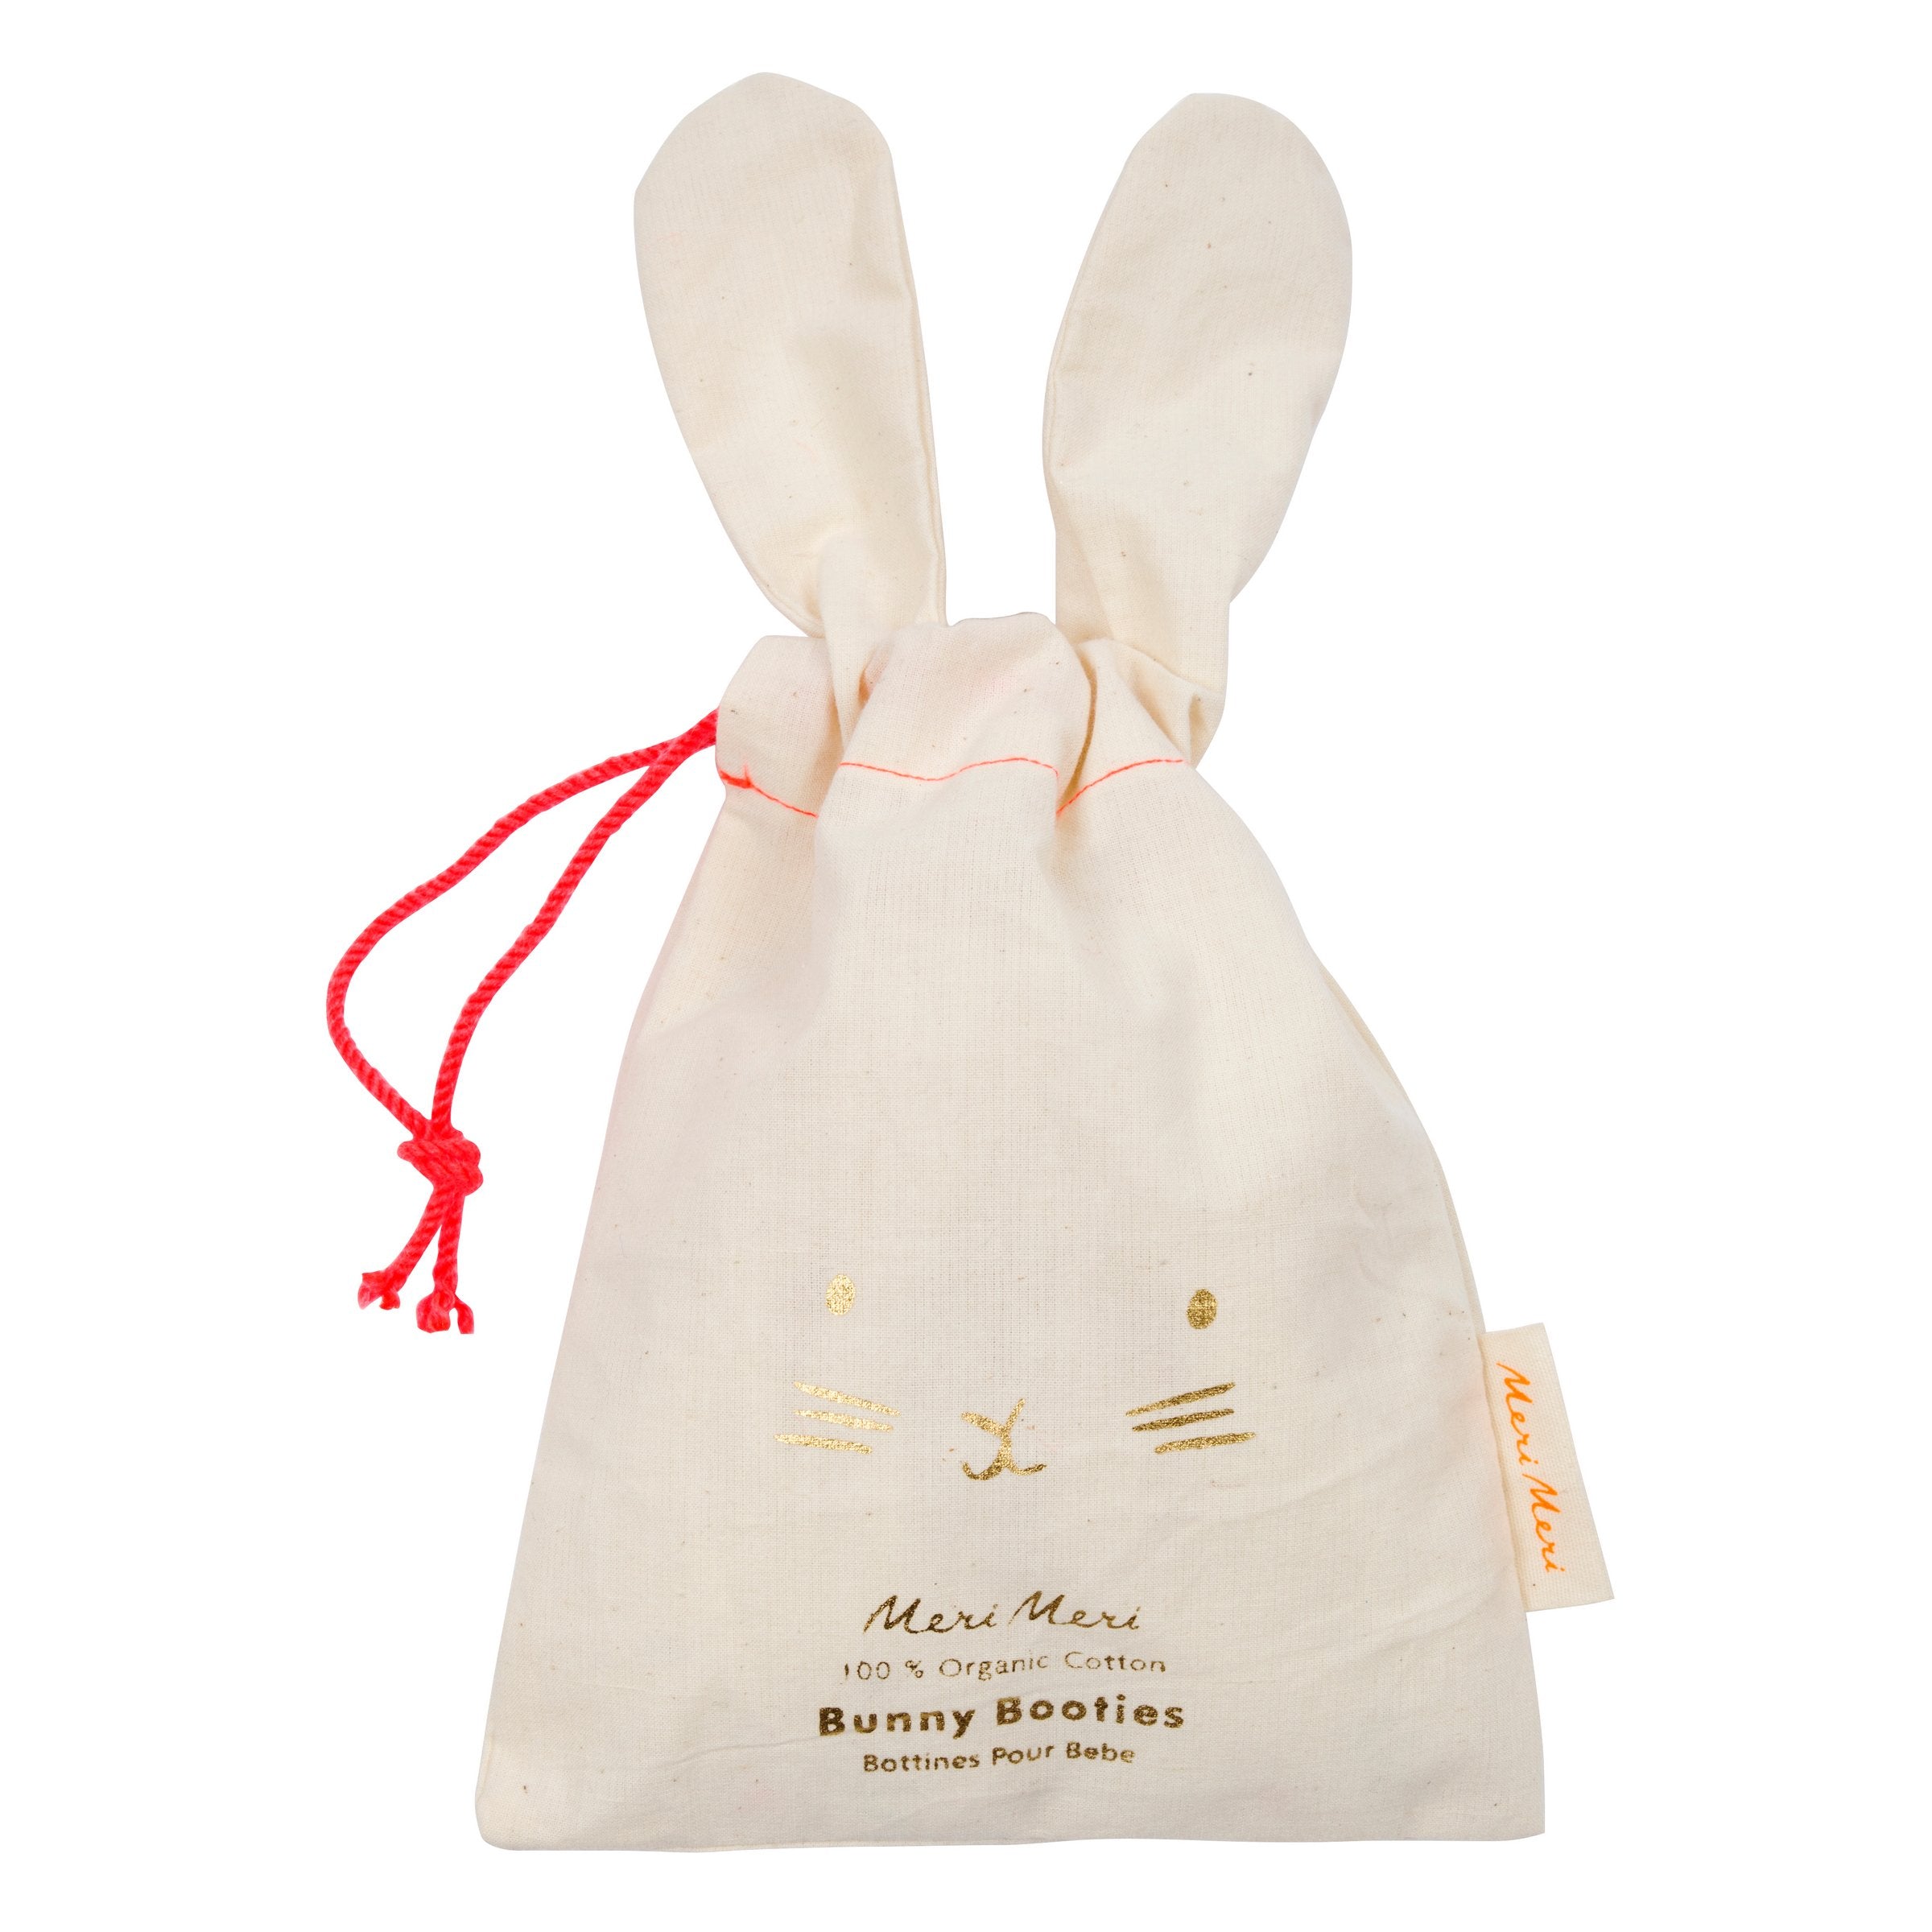 These adorable bunny booties are crafted from knitted organic cotton, with a peach lining, stitched features and floppy ears.